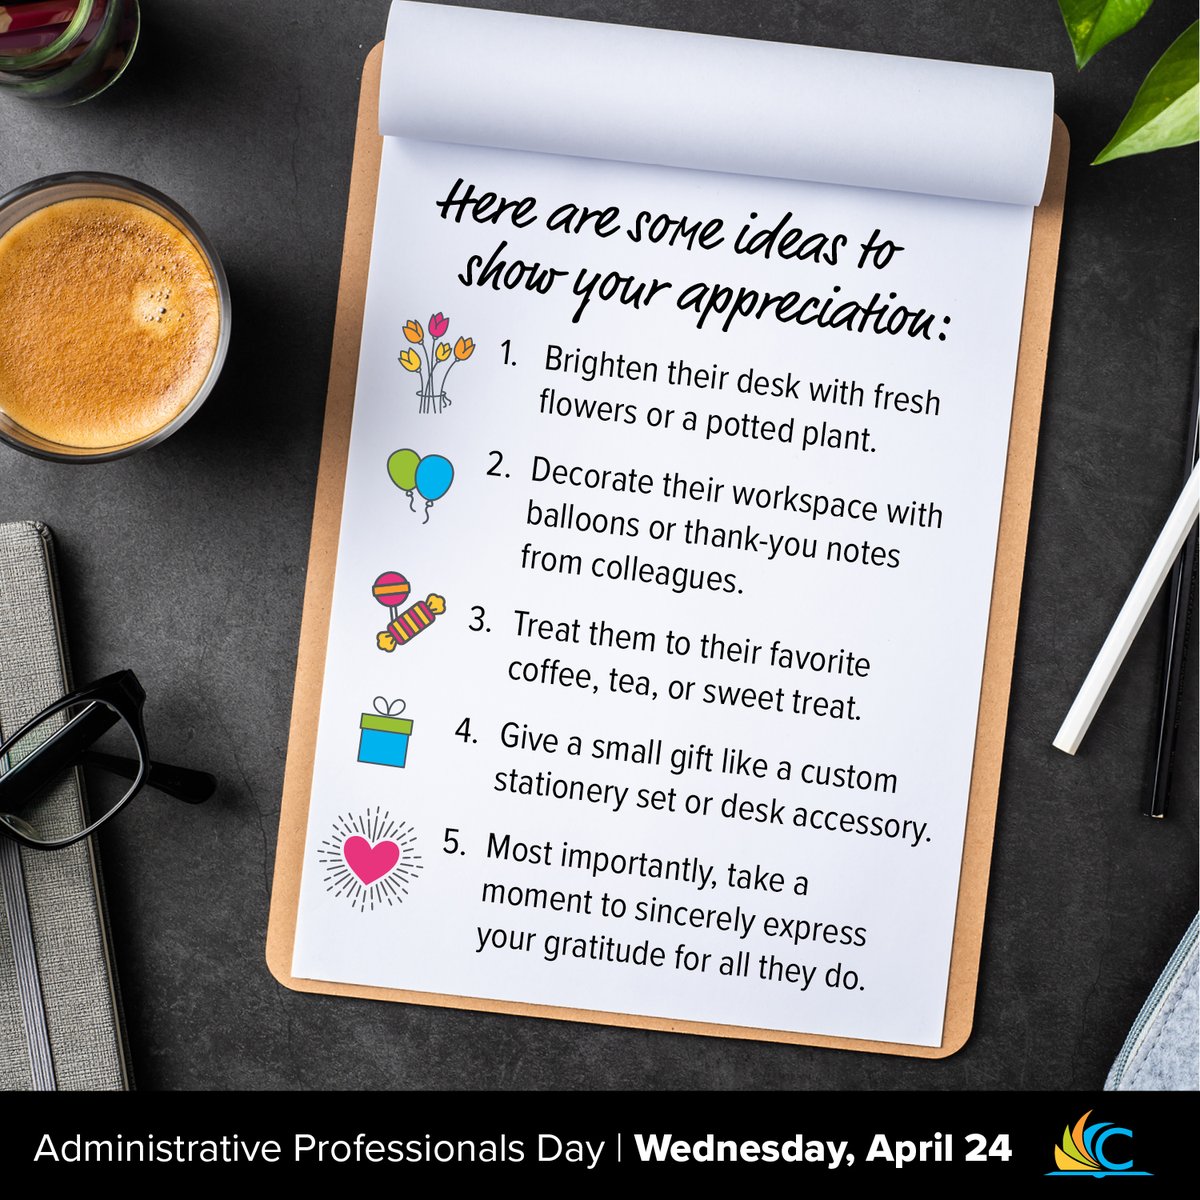 Next week is Administrative Professionals Week! Let's celebrate the amazing individuals who keep our days running smoothly. Below are some ideas to show your appreciation. Let's make our administrative professionals feel special and appreciated for their incredible work! ✨